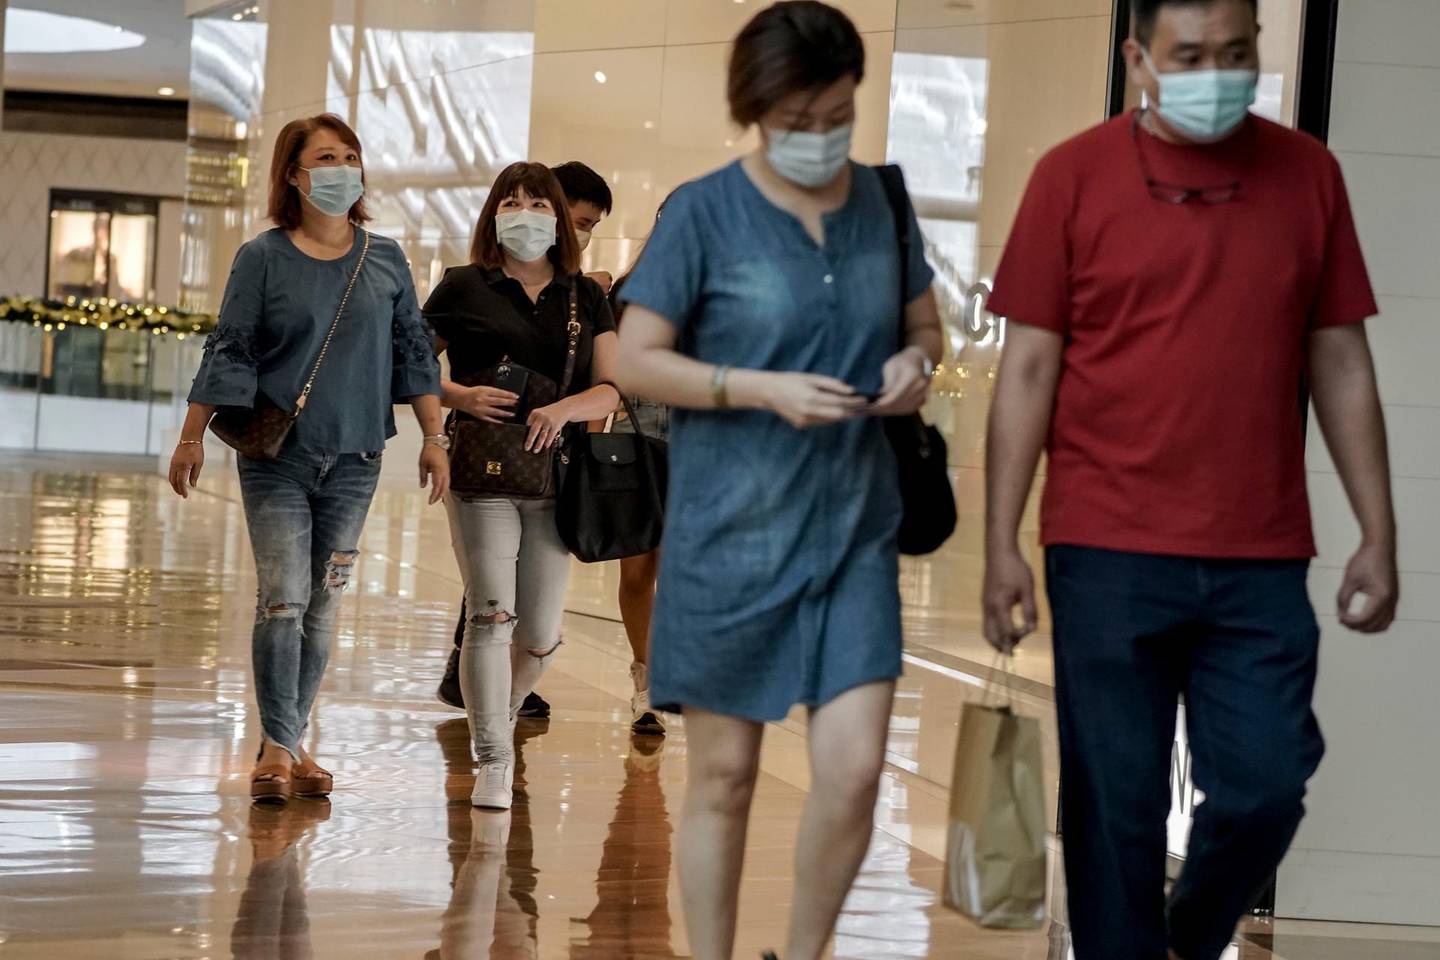 epa08824819 Visitors walk through the Marina Bay Sands shopping mall in Singapore,  17 November 2020. Singapore's economy is predicted to take 'much longer' to recover from the economic fallout caused by the global Covid-19 coronavirus pandemic than previous recessions. Singapore's Prime Minister Lee Hsien Loong says that the government's budget will likely run as a deficit through to early 2021.  EPA/WALLACE WOON